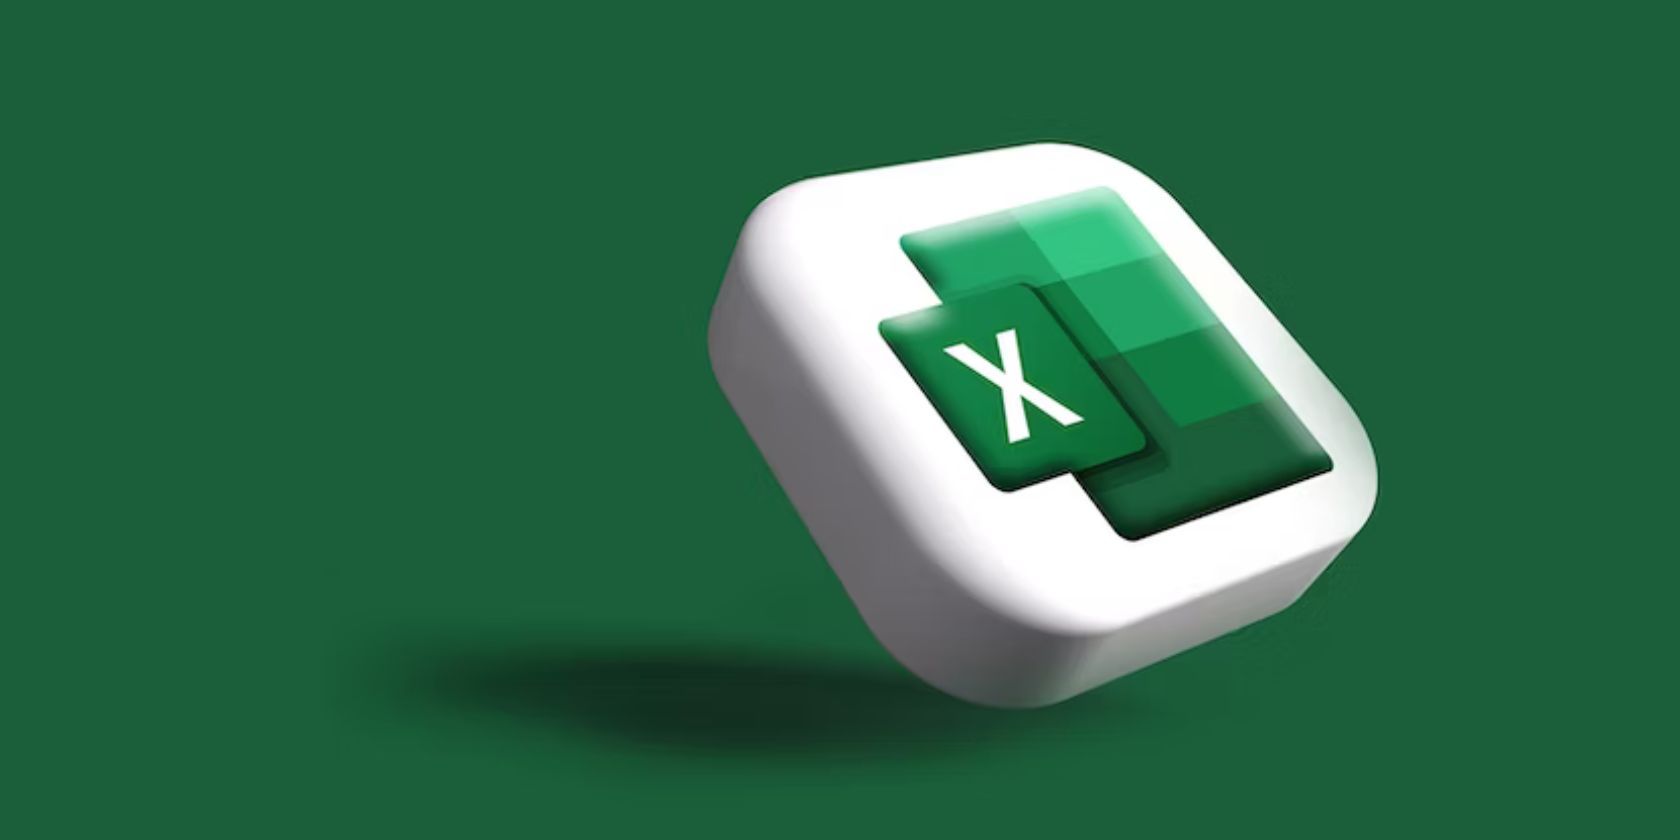 An icon of Microsoft Excel in 3D floating in a green background